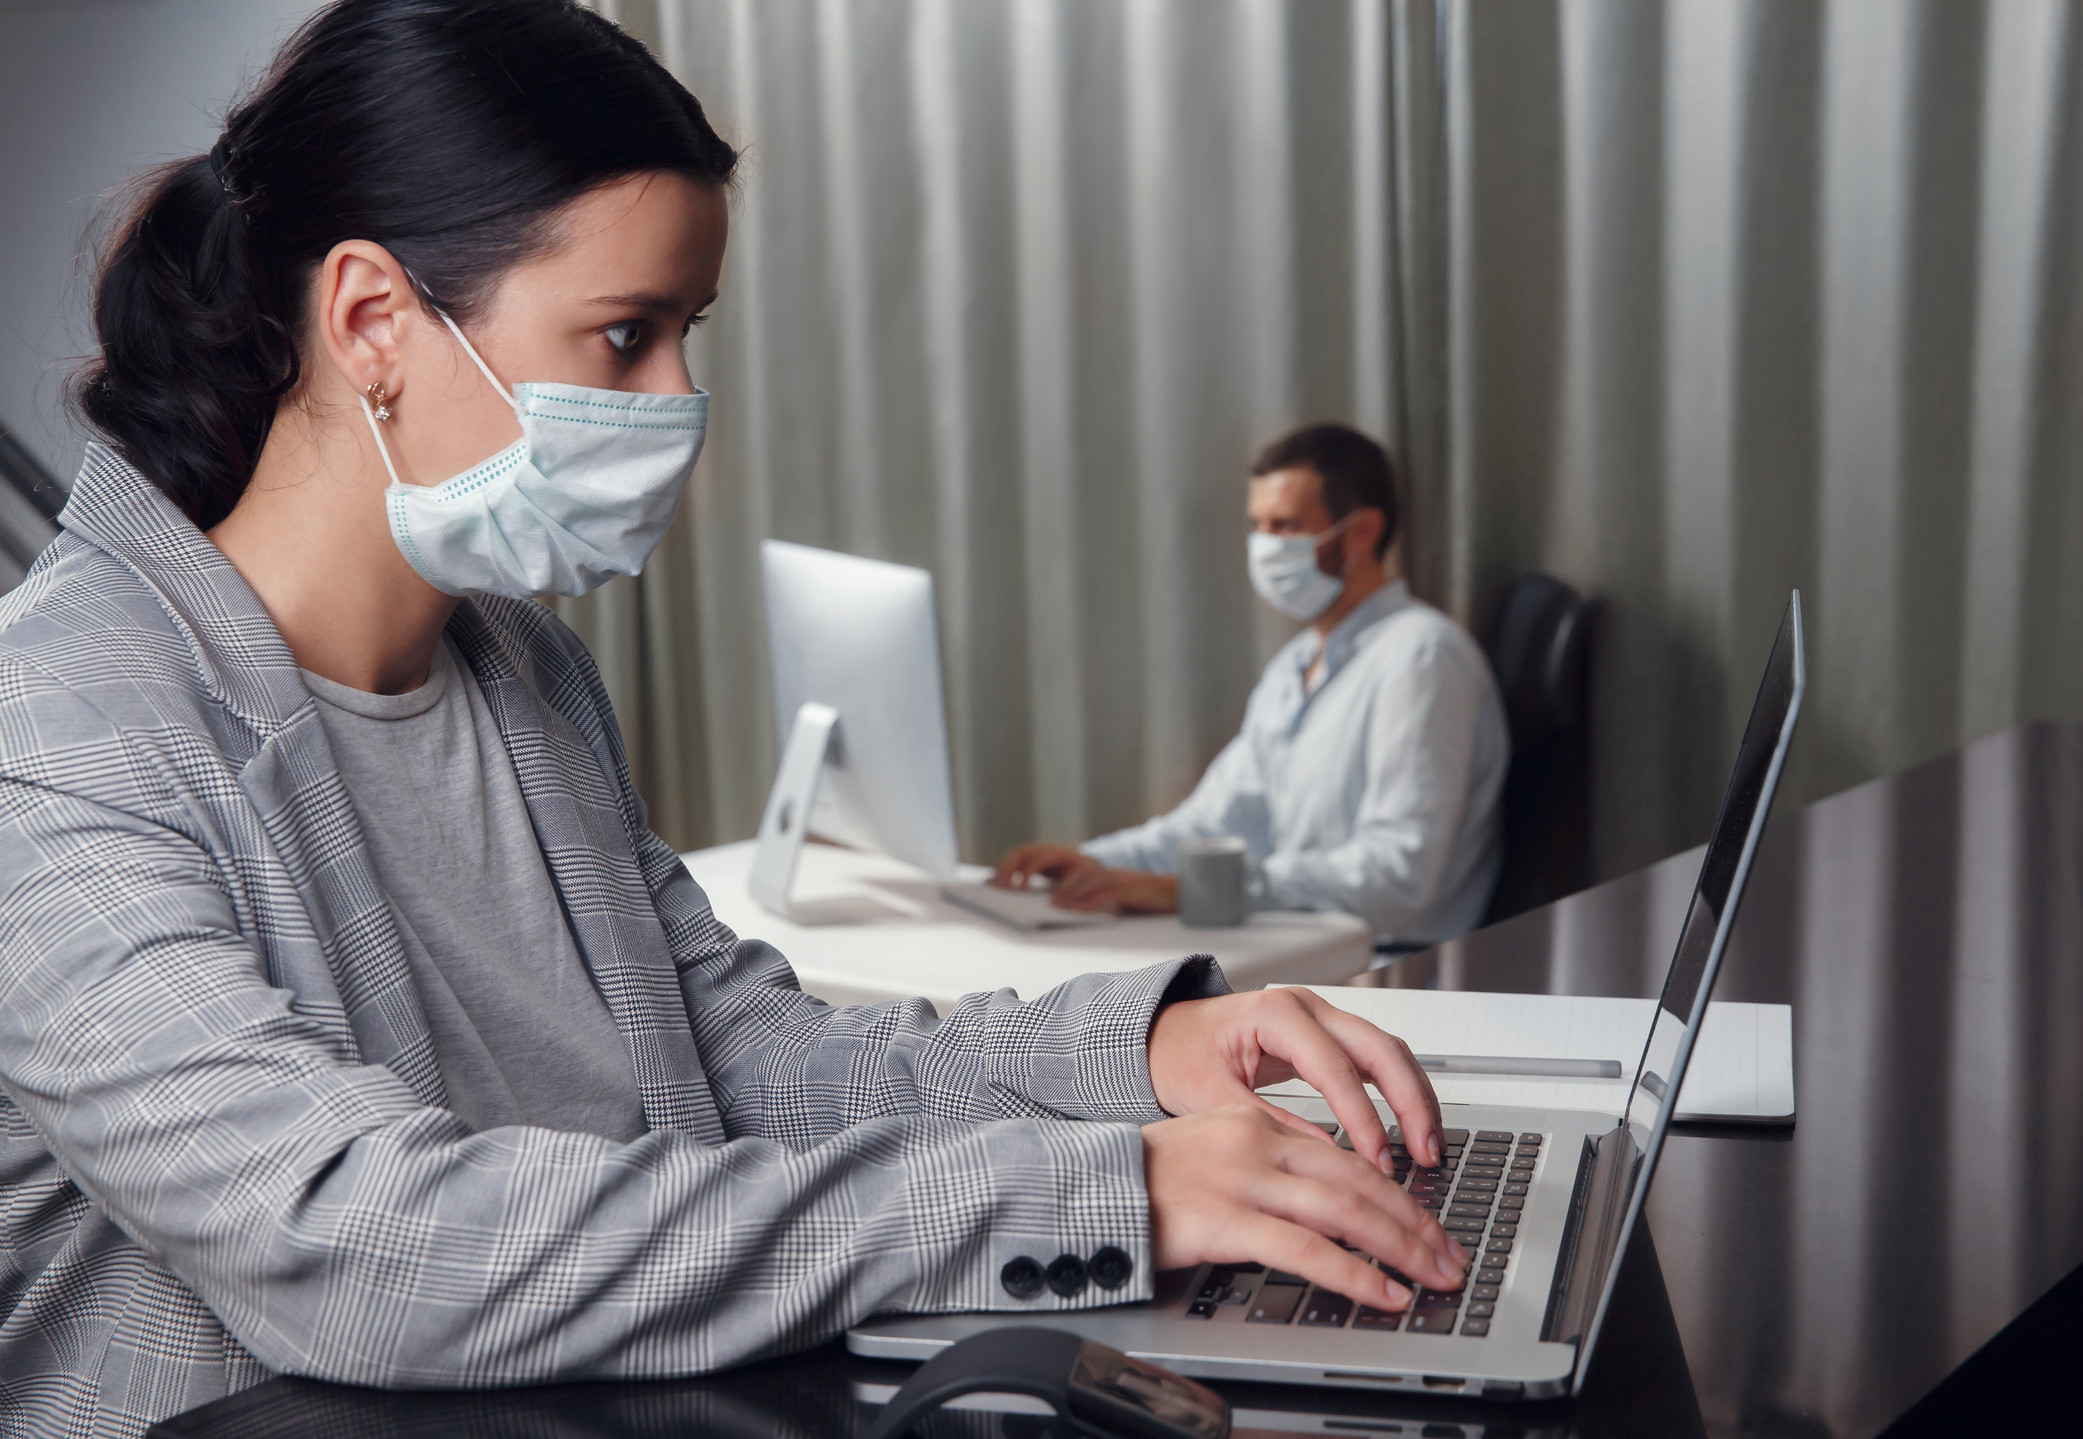 Employees working in business office while wearing medical face mask for protecting and preventing the infection of corona virus disease or covid-19